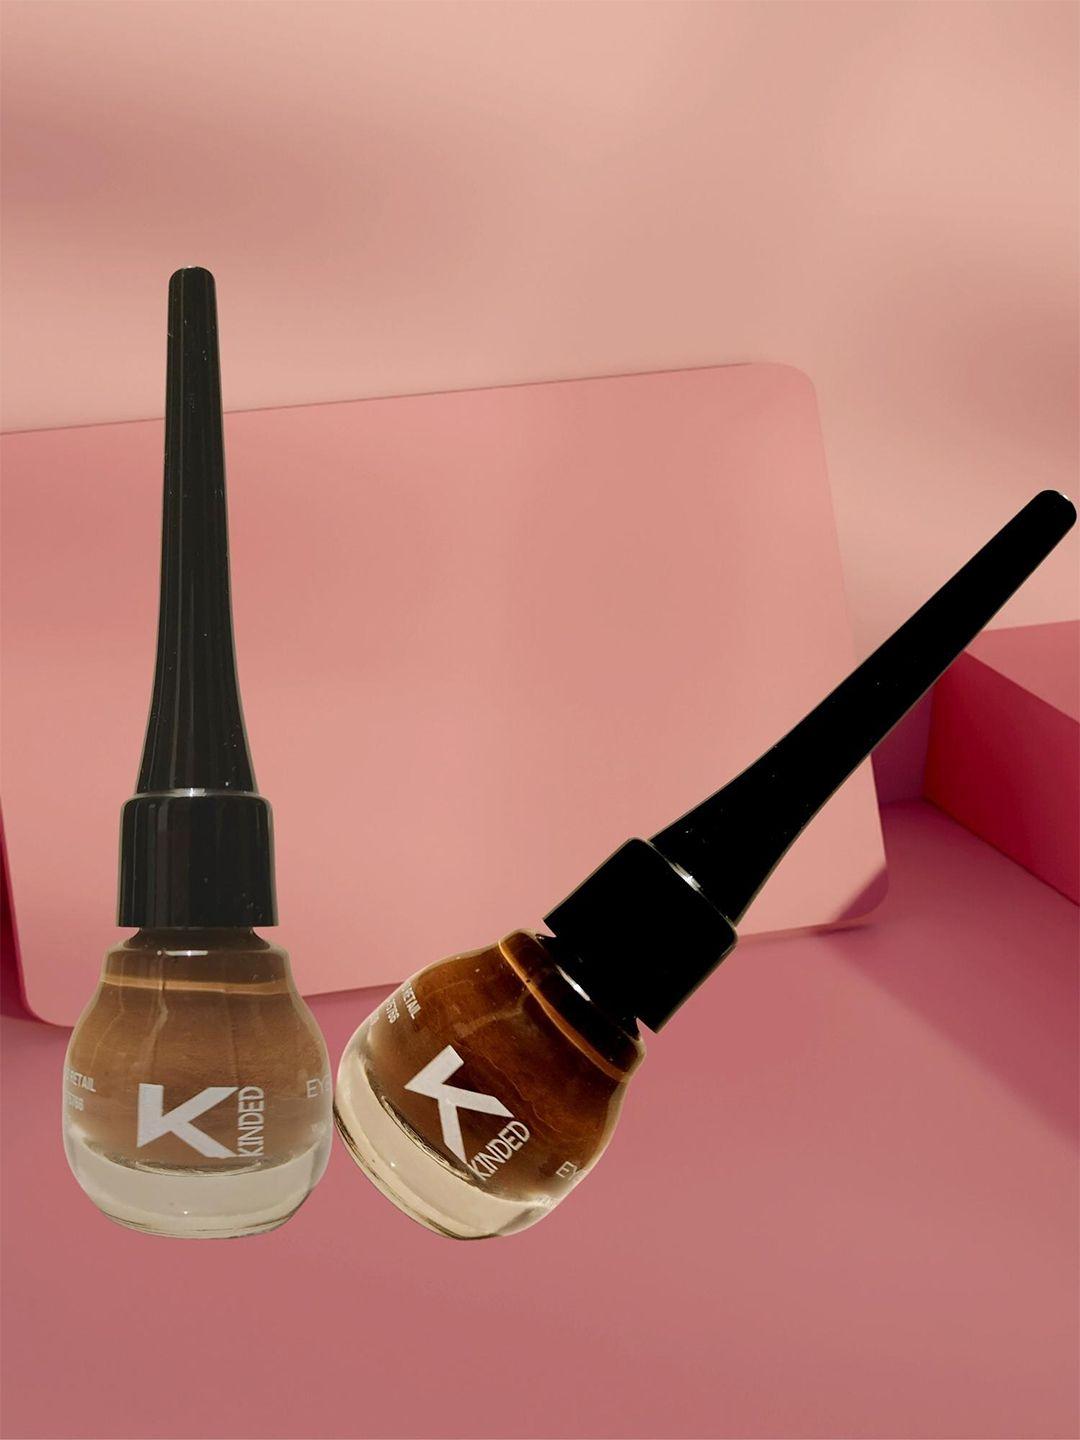 kinded set of 2 smudge proof liquid eye liner 5ml each-chocolate brown 03 & camel brown 05